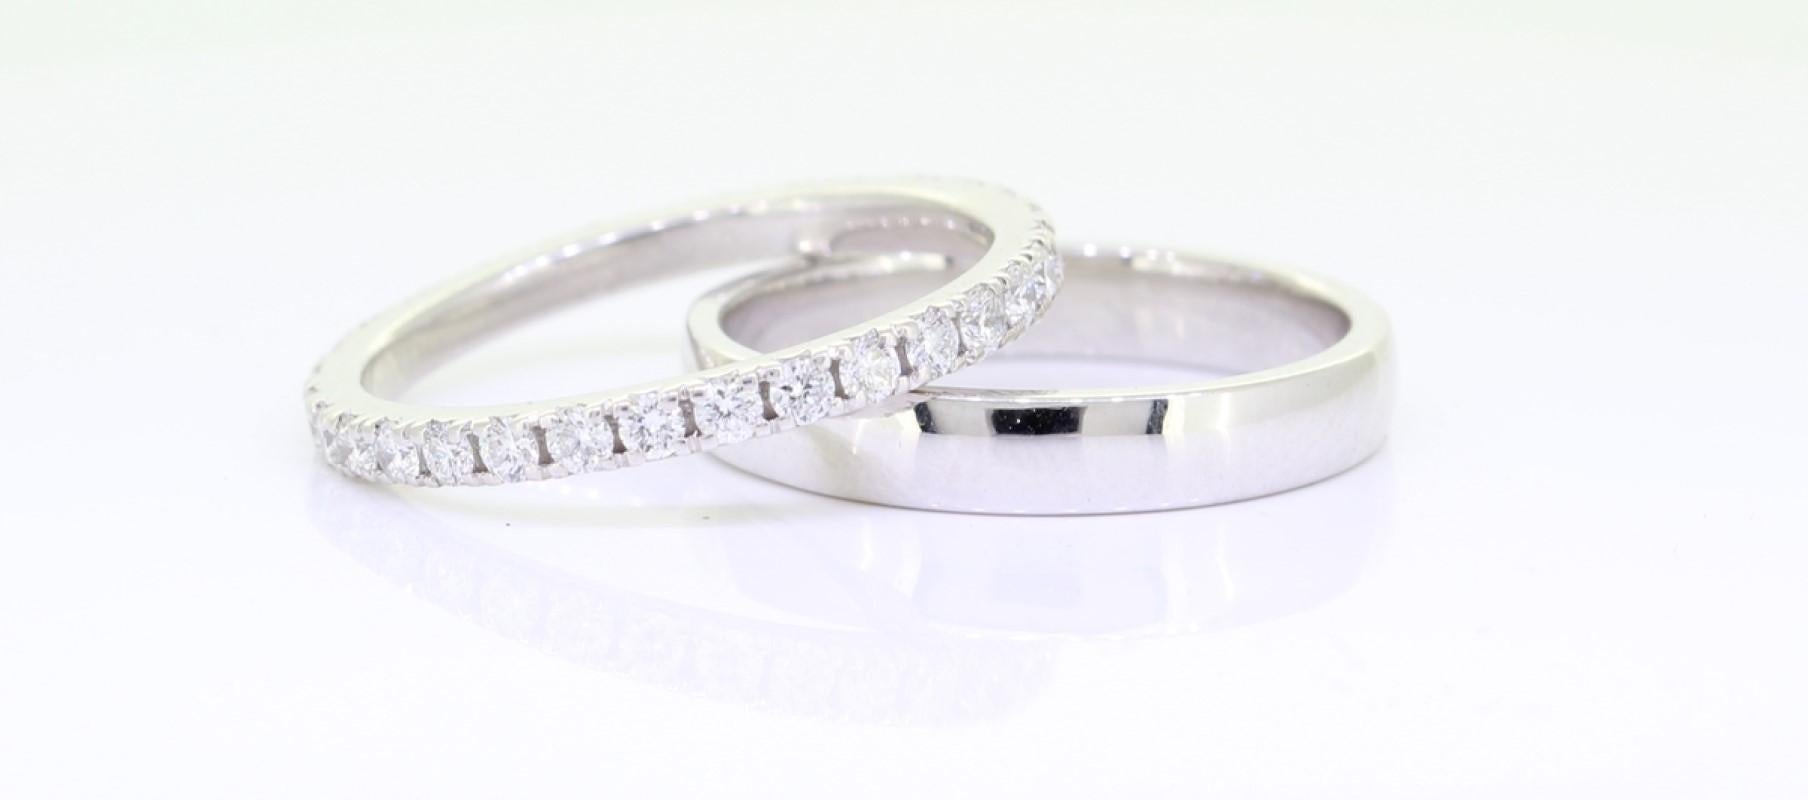 A Beautiful Handcrafted Eternity Wedding Band Ring in Platinum 950 with Natural Brilliant Cut Round Diamond . A perfect Wedding Band with toatl 0.76 Carat of Diamonds.

Natural Diamond Details
Pieces :  31 Pieces
Weight : 0.76 Carat 
Clarity of